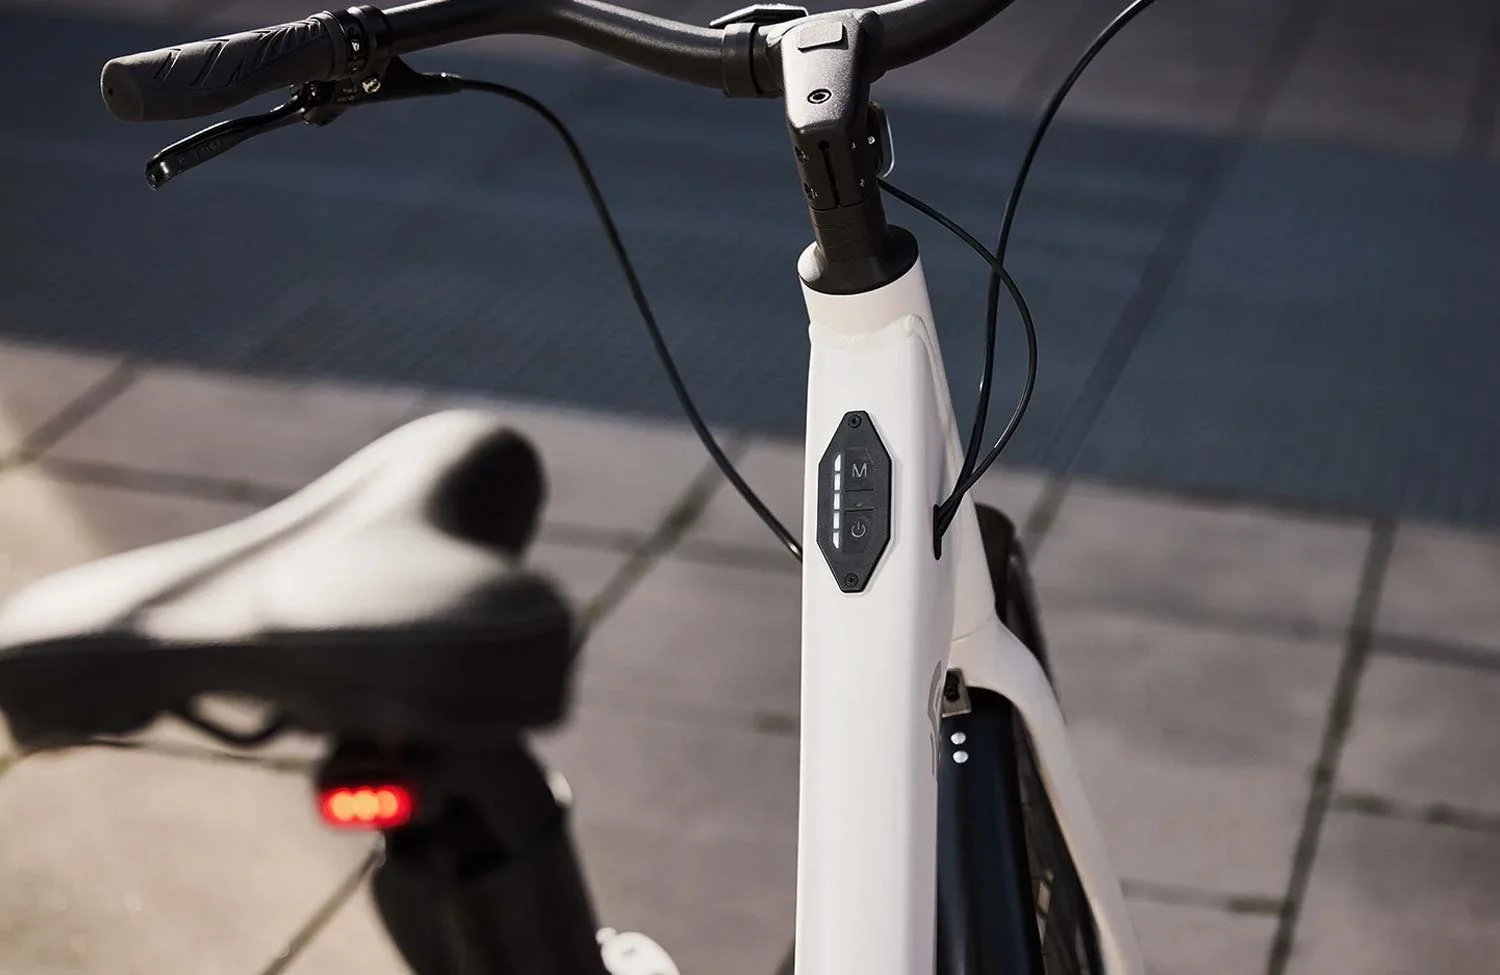 An urban e-bike from take — at discounter: the Crivit bike we the new Lidl look from a